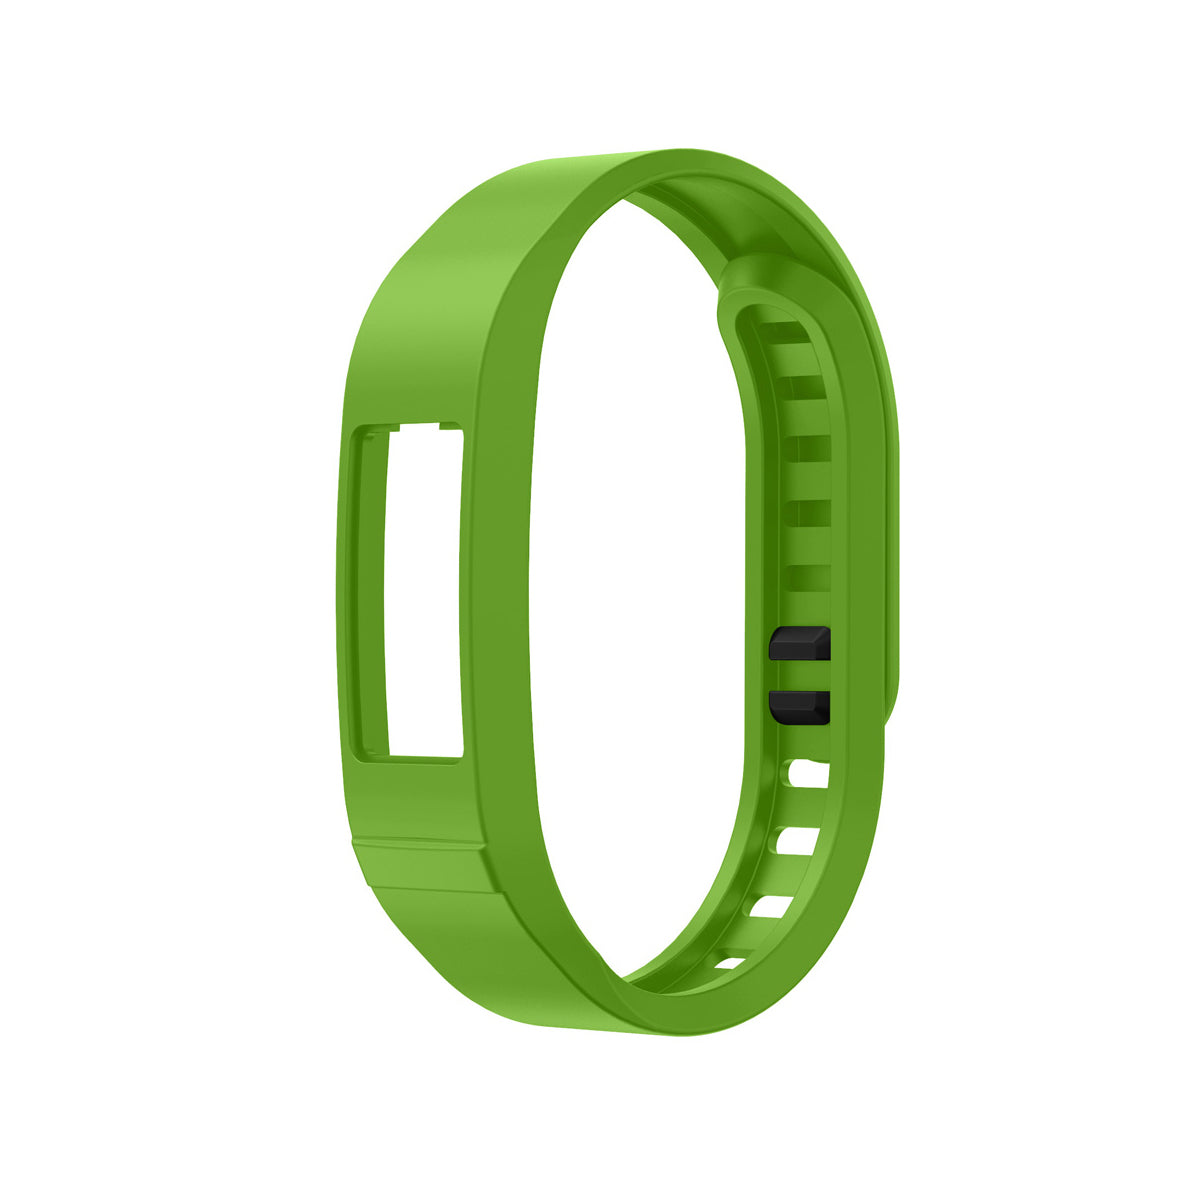 Garmin Vivofit 2 Bands Replacement Strap With Clasp Large Green 2-Pack 